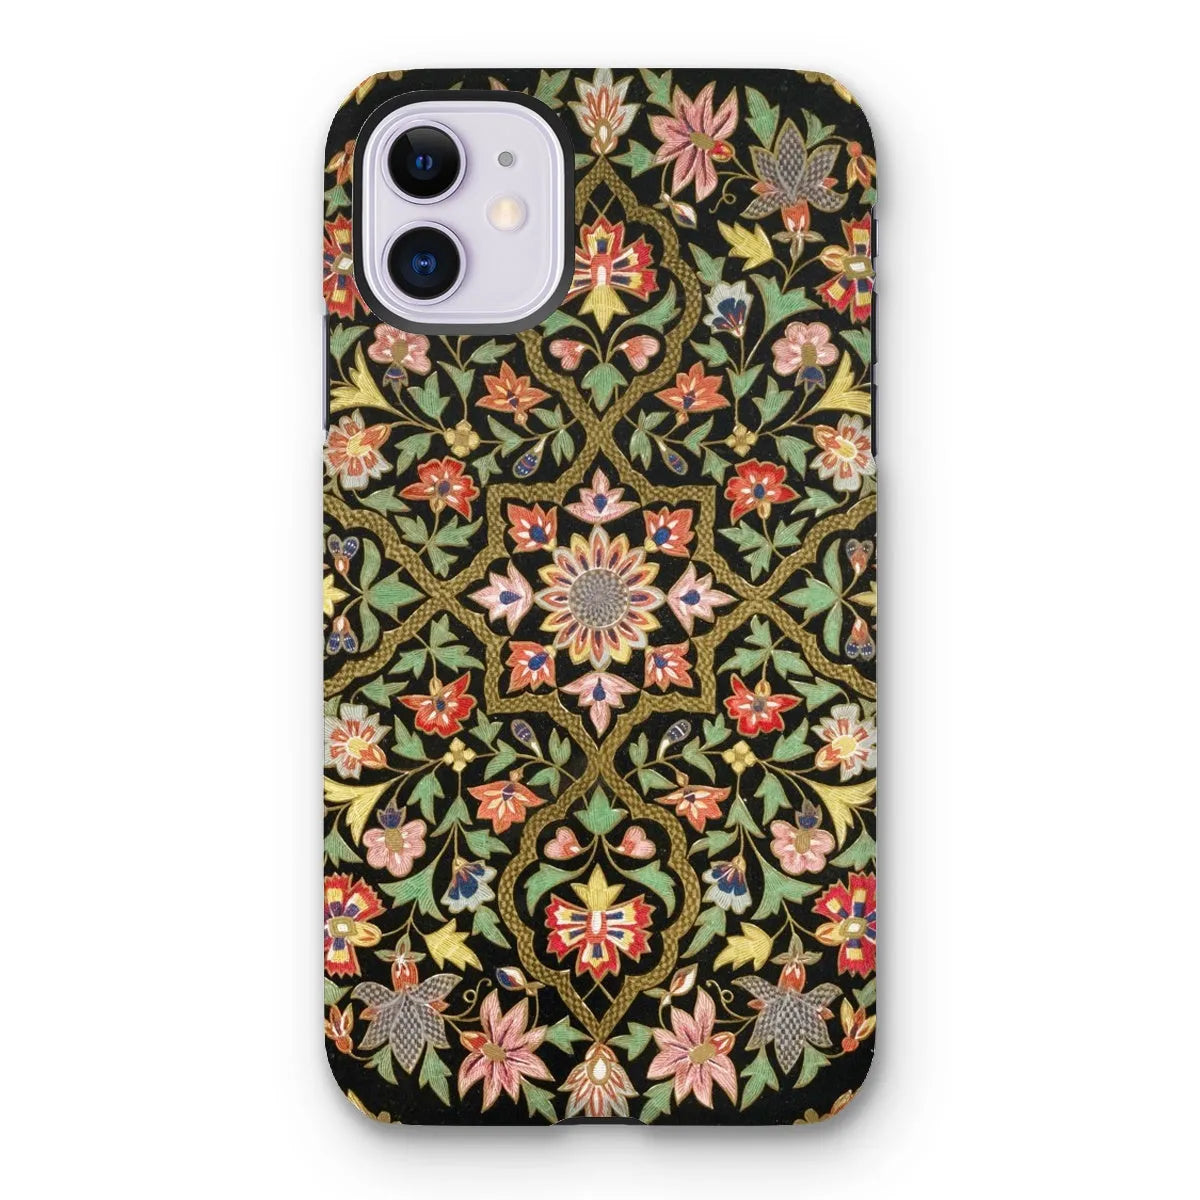 Indian Embroidery - Aesthetic Pattern Art Phone Case - Iphone 11 / Matte - Mobile Phone Cases - Aesthetic Art